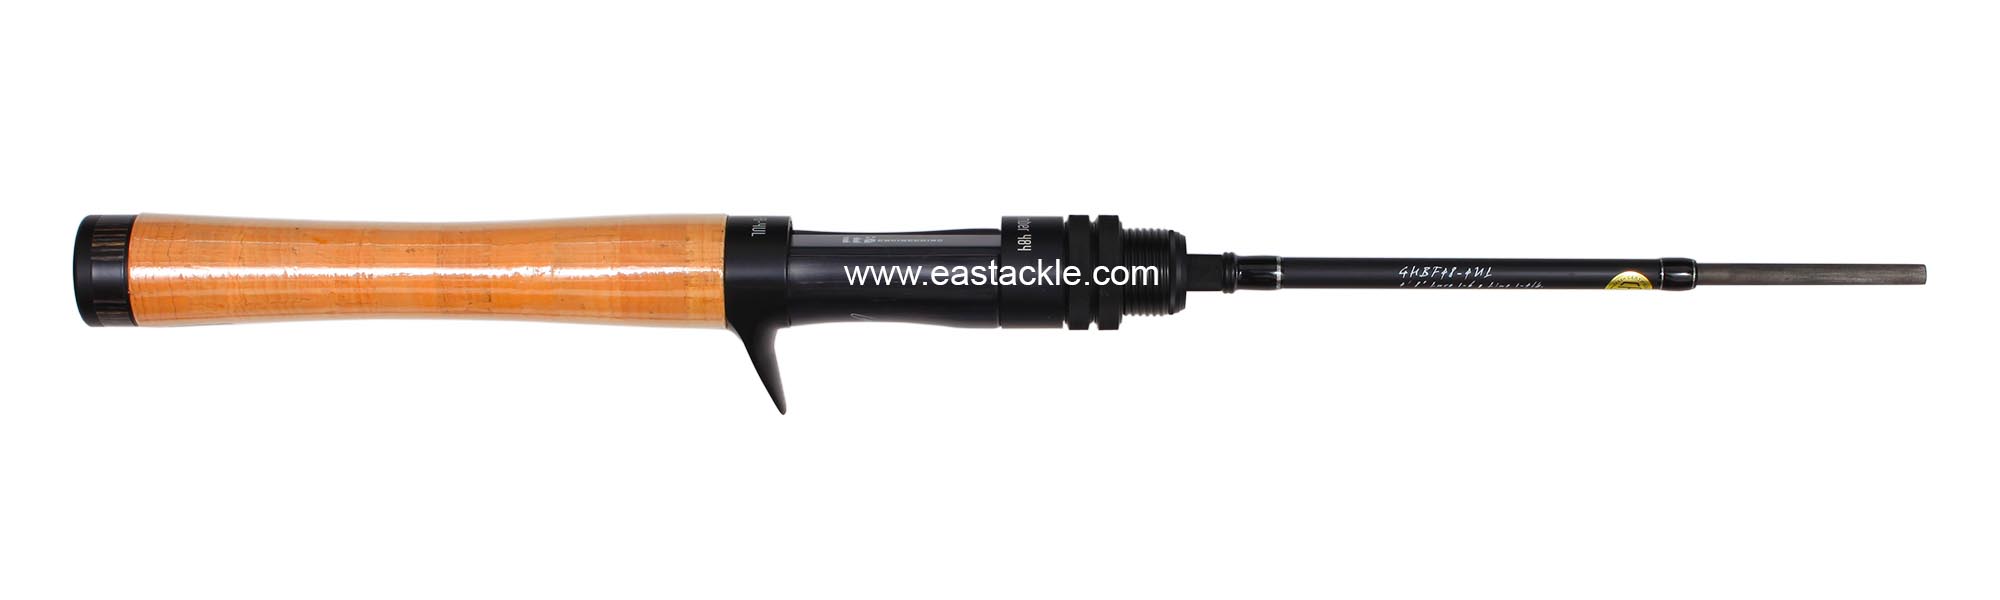 Megabass - Great Hunting - GHBF 48-4 UL - Bait Casting Rod - Handle Section (Side View) | Eastackle